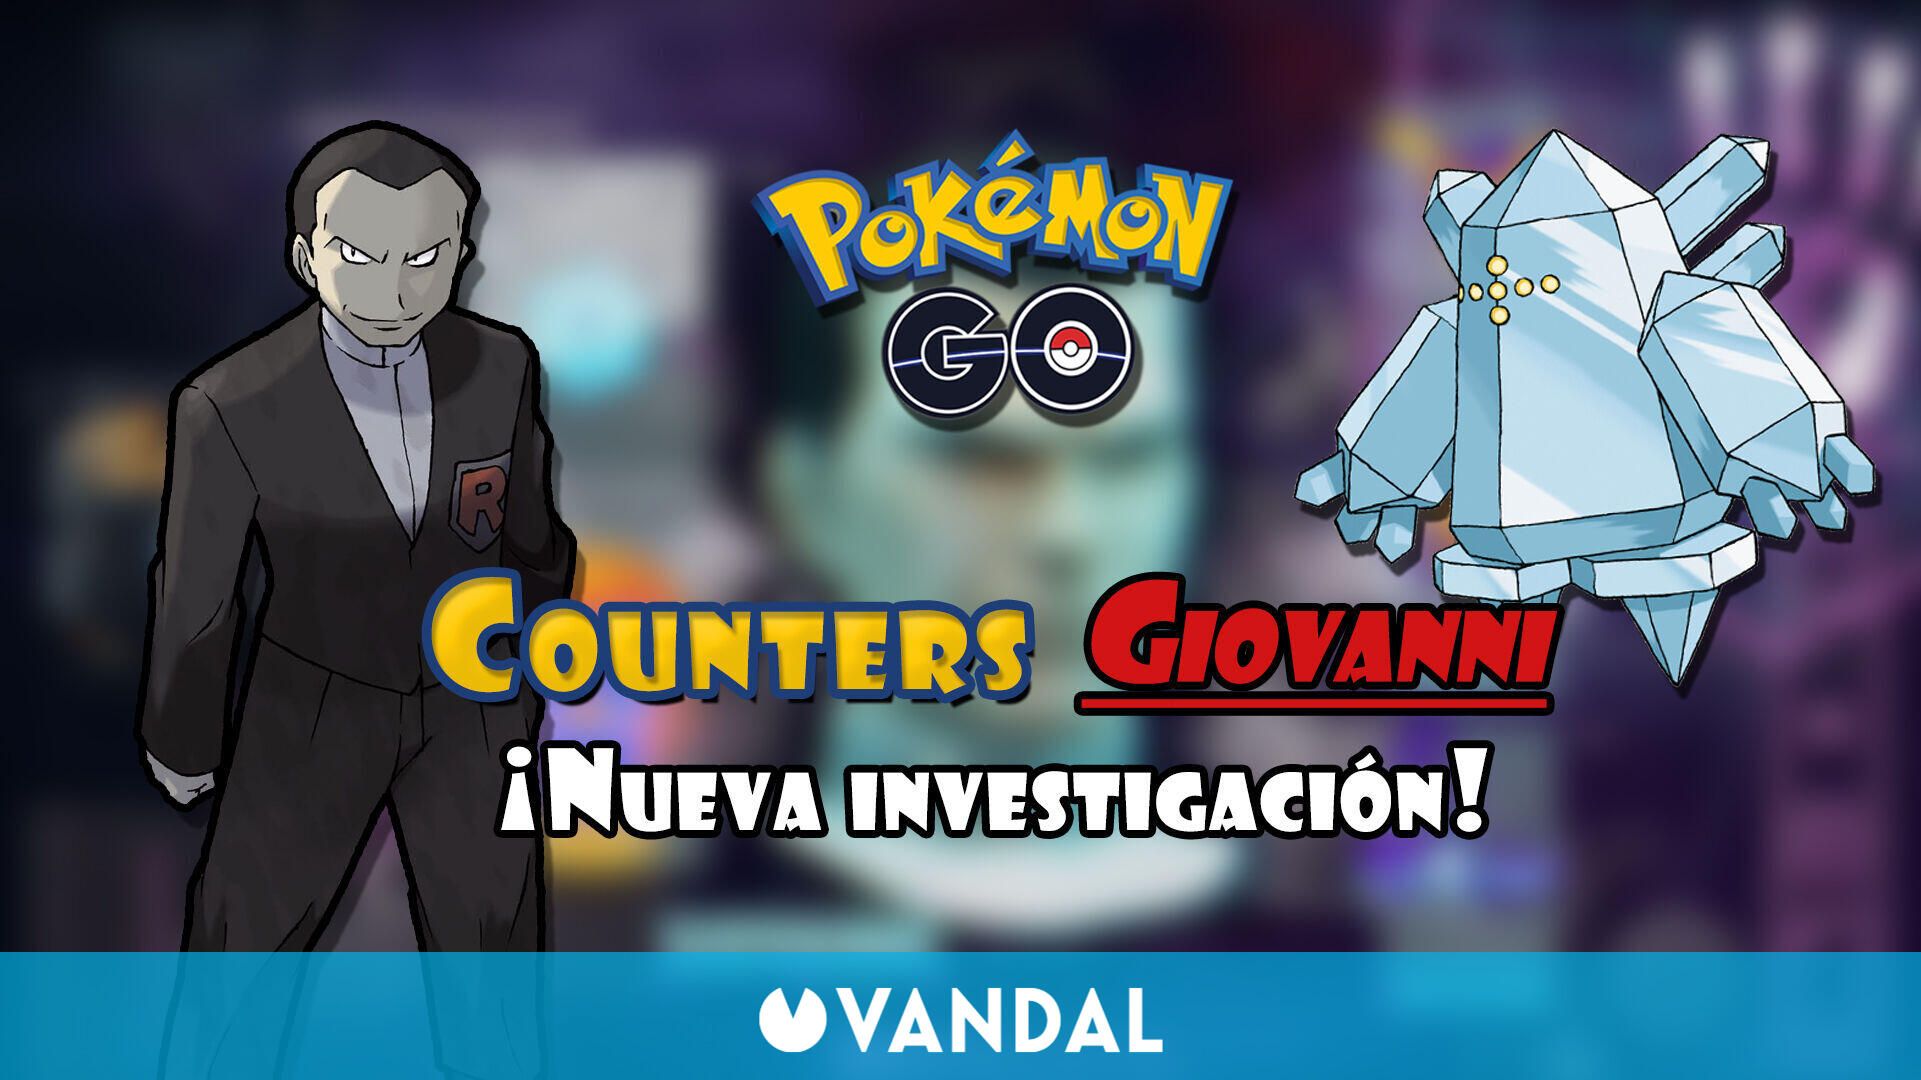 Pokémon GO: How to beat Giovanni and get Dark Regice – the best counters